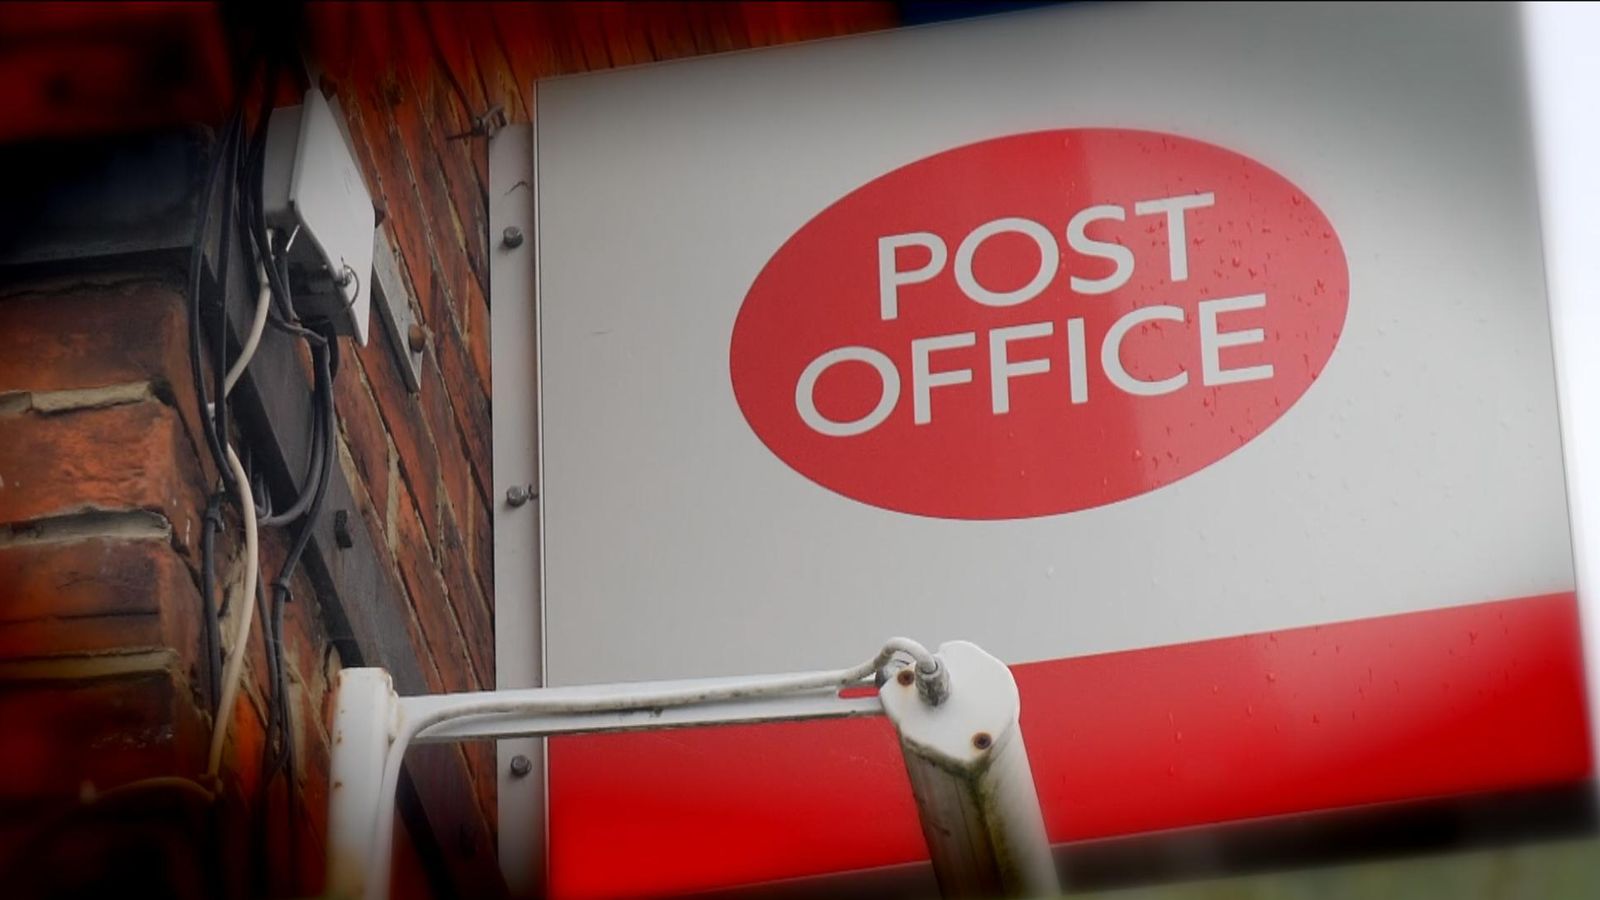 Horizon IT scandal: Post Office officials knew of instruction for Fujitsu to remotely change sub-postmaster accounts 10 years ago, leaked recordings suggest